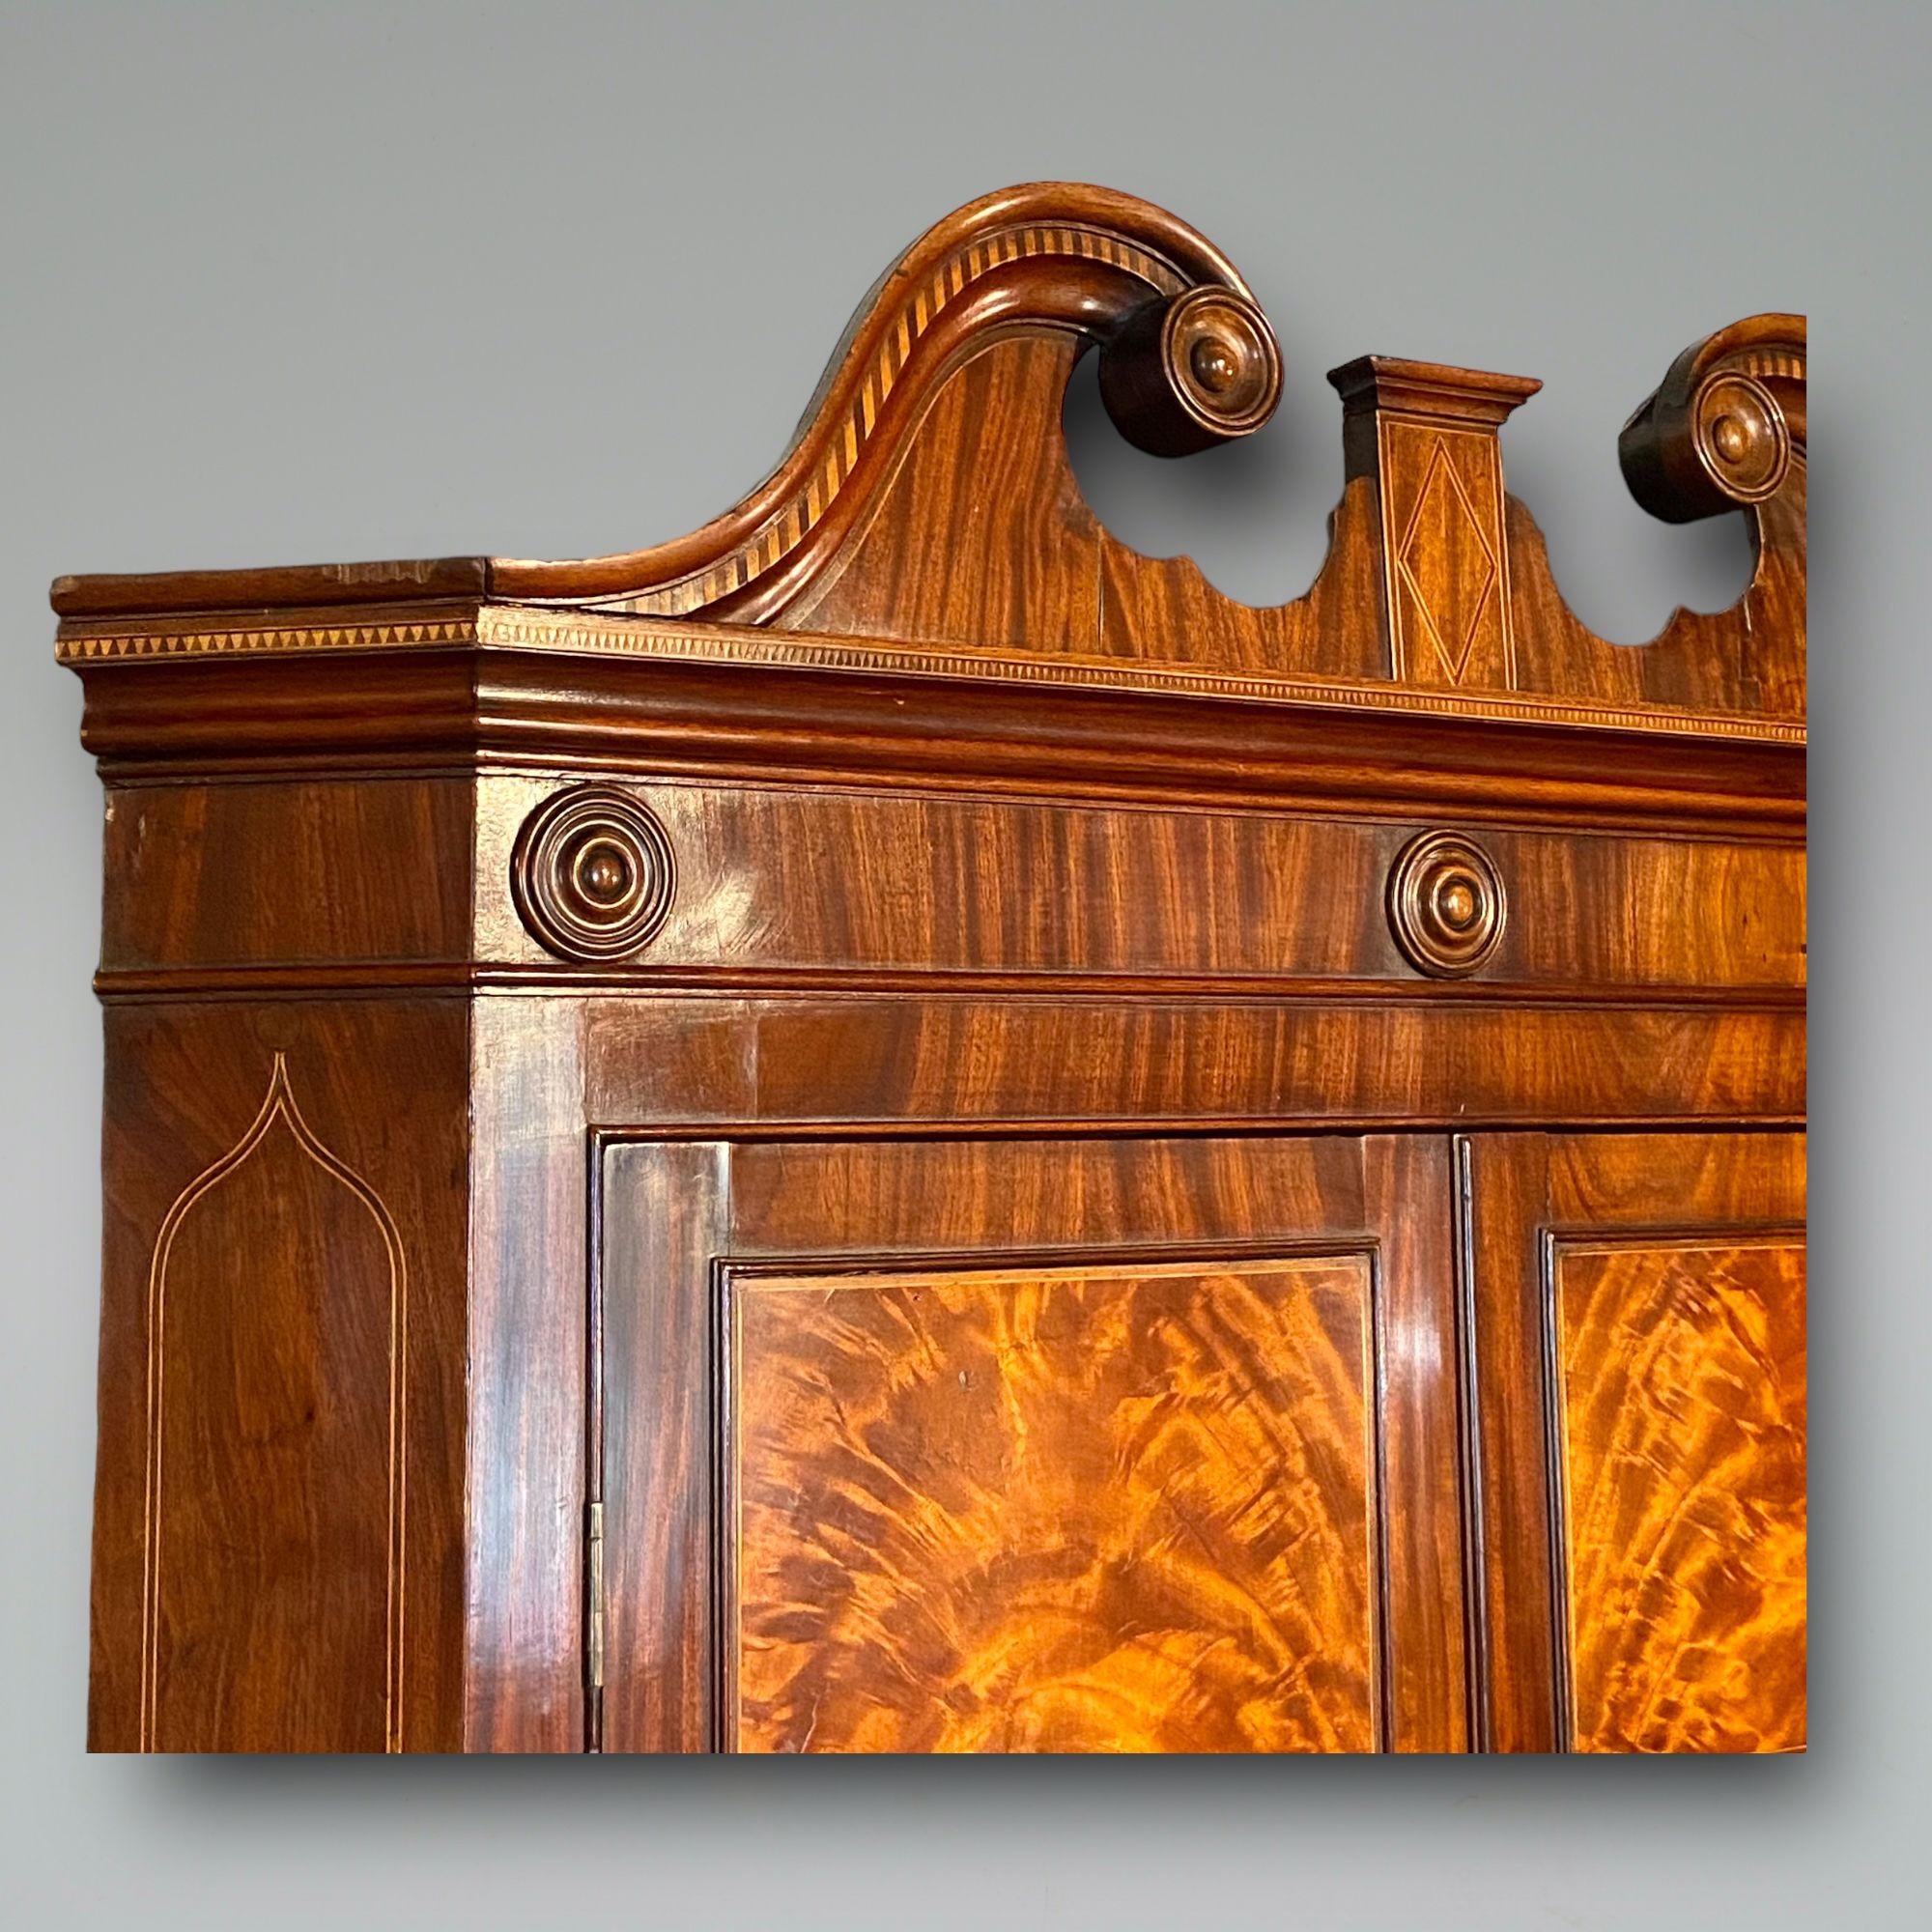 A fine example of a late 18th century floor standing mahogany corner cupboard with flame mahogany panels and swanneck pediment.